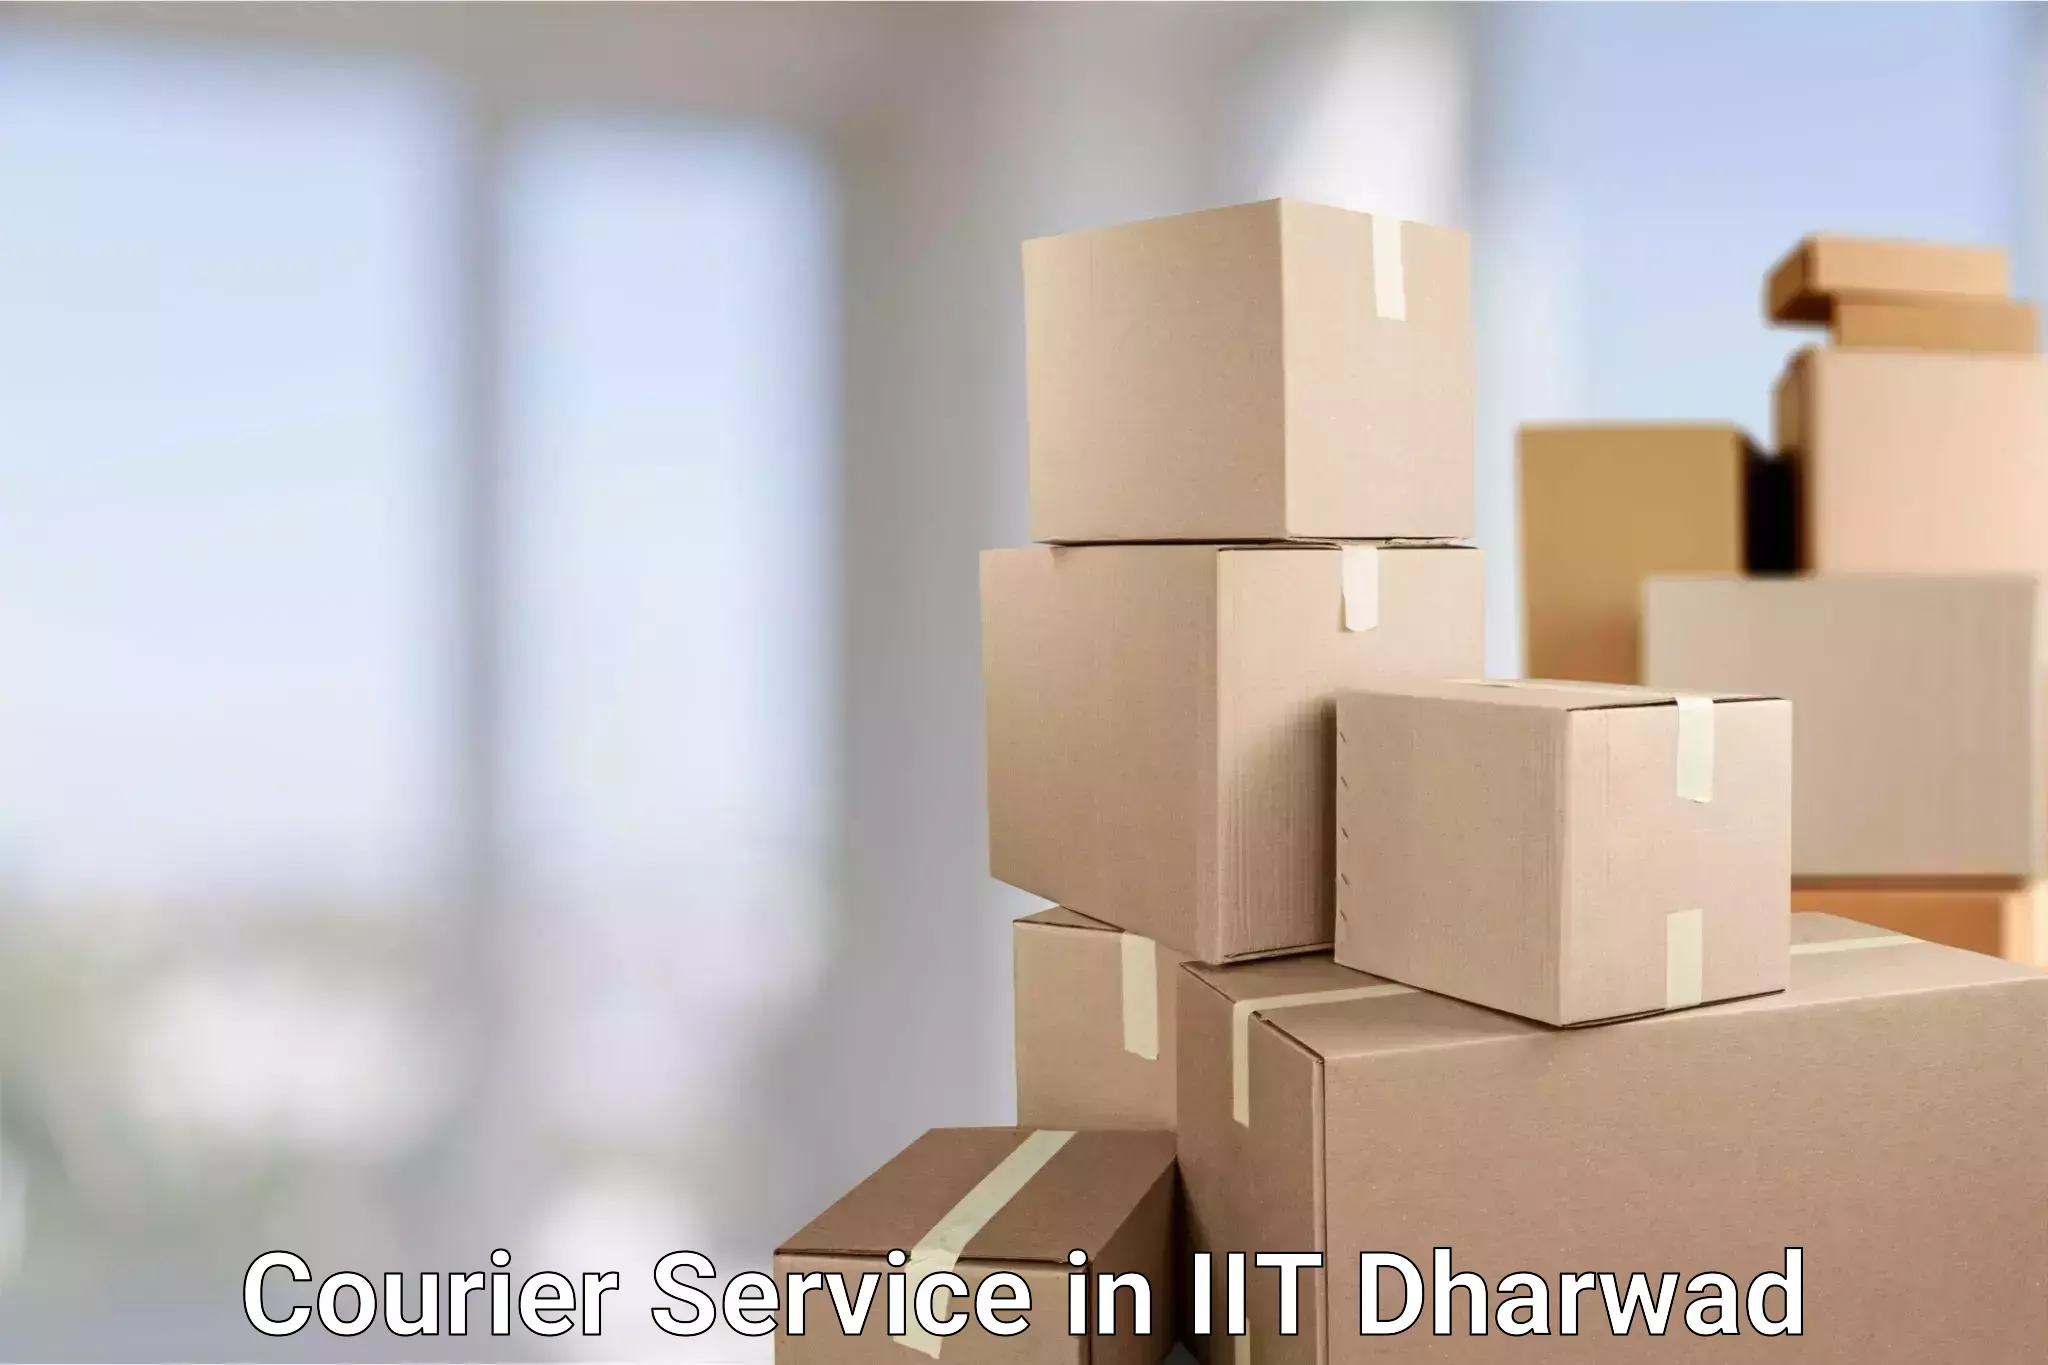 Advanced freight services in IIT Dharwad